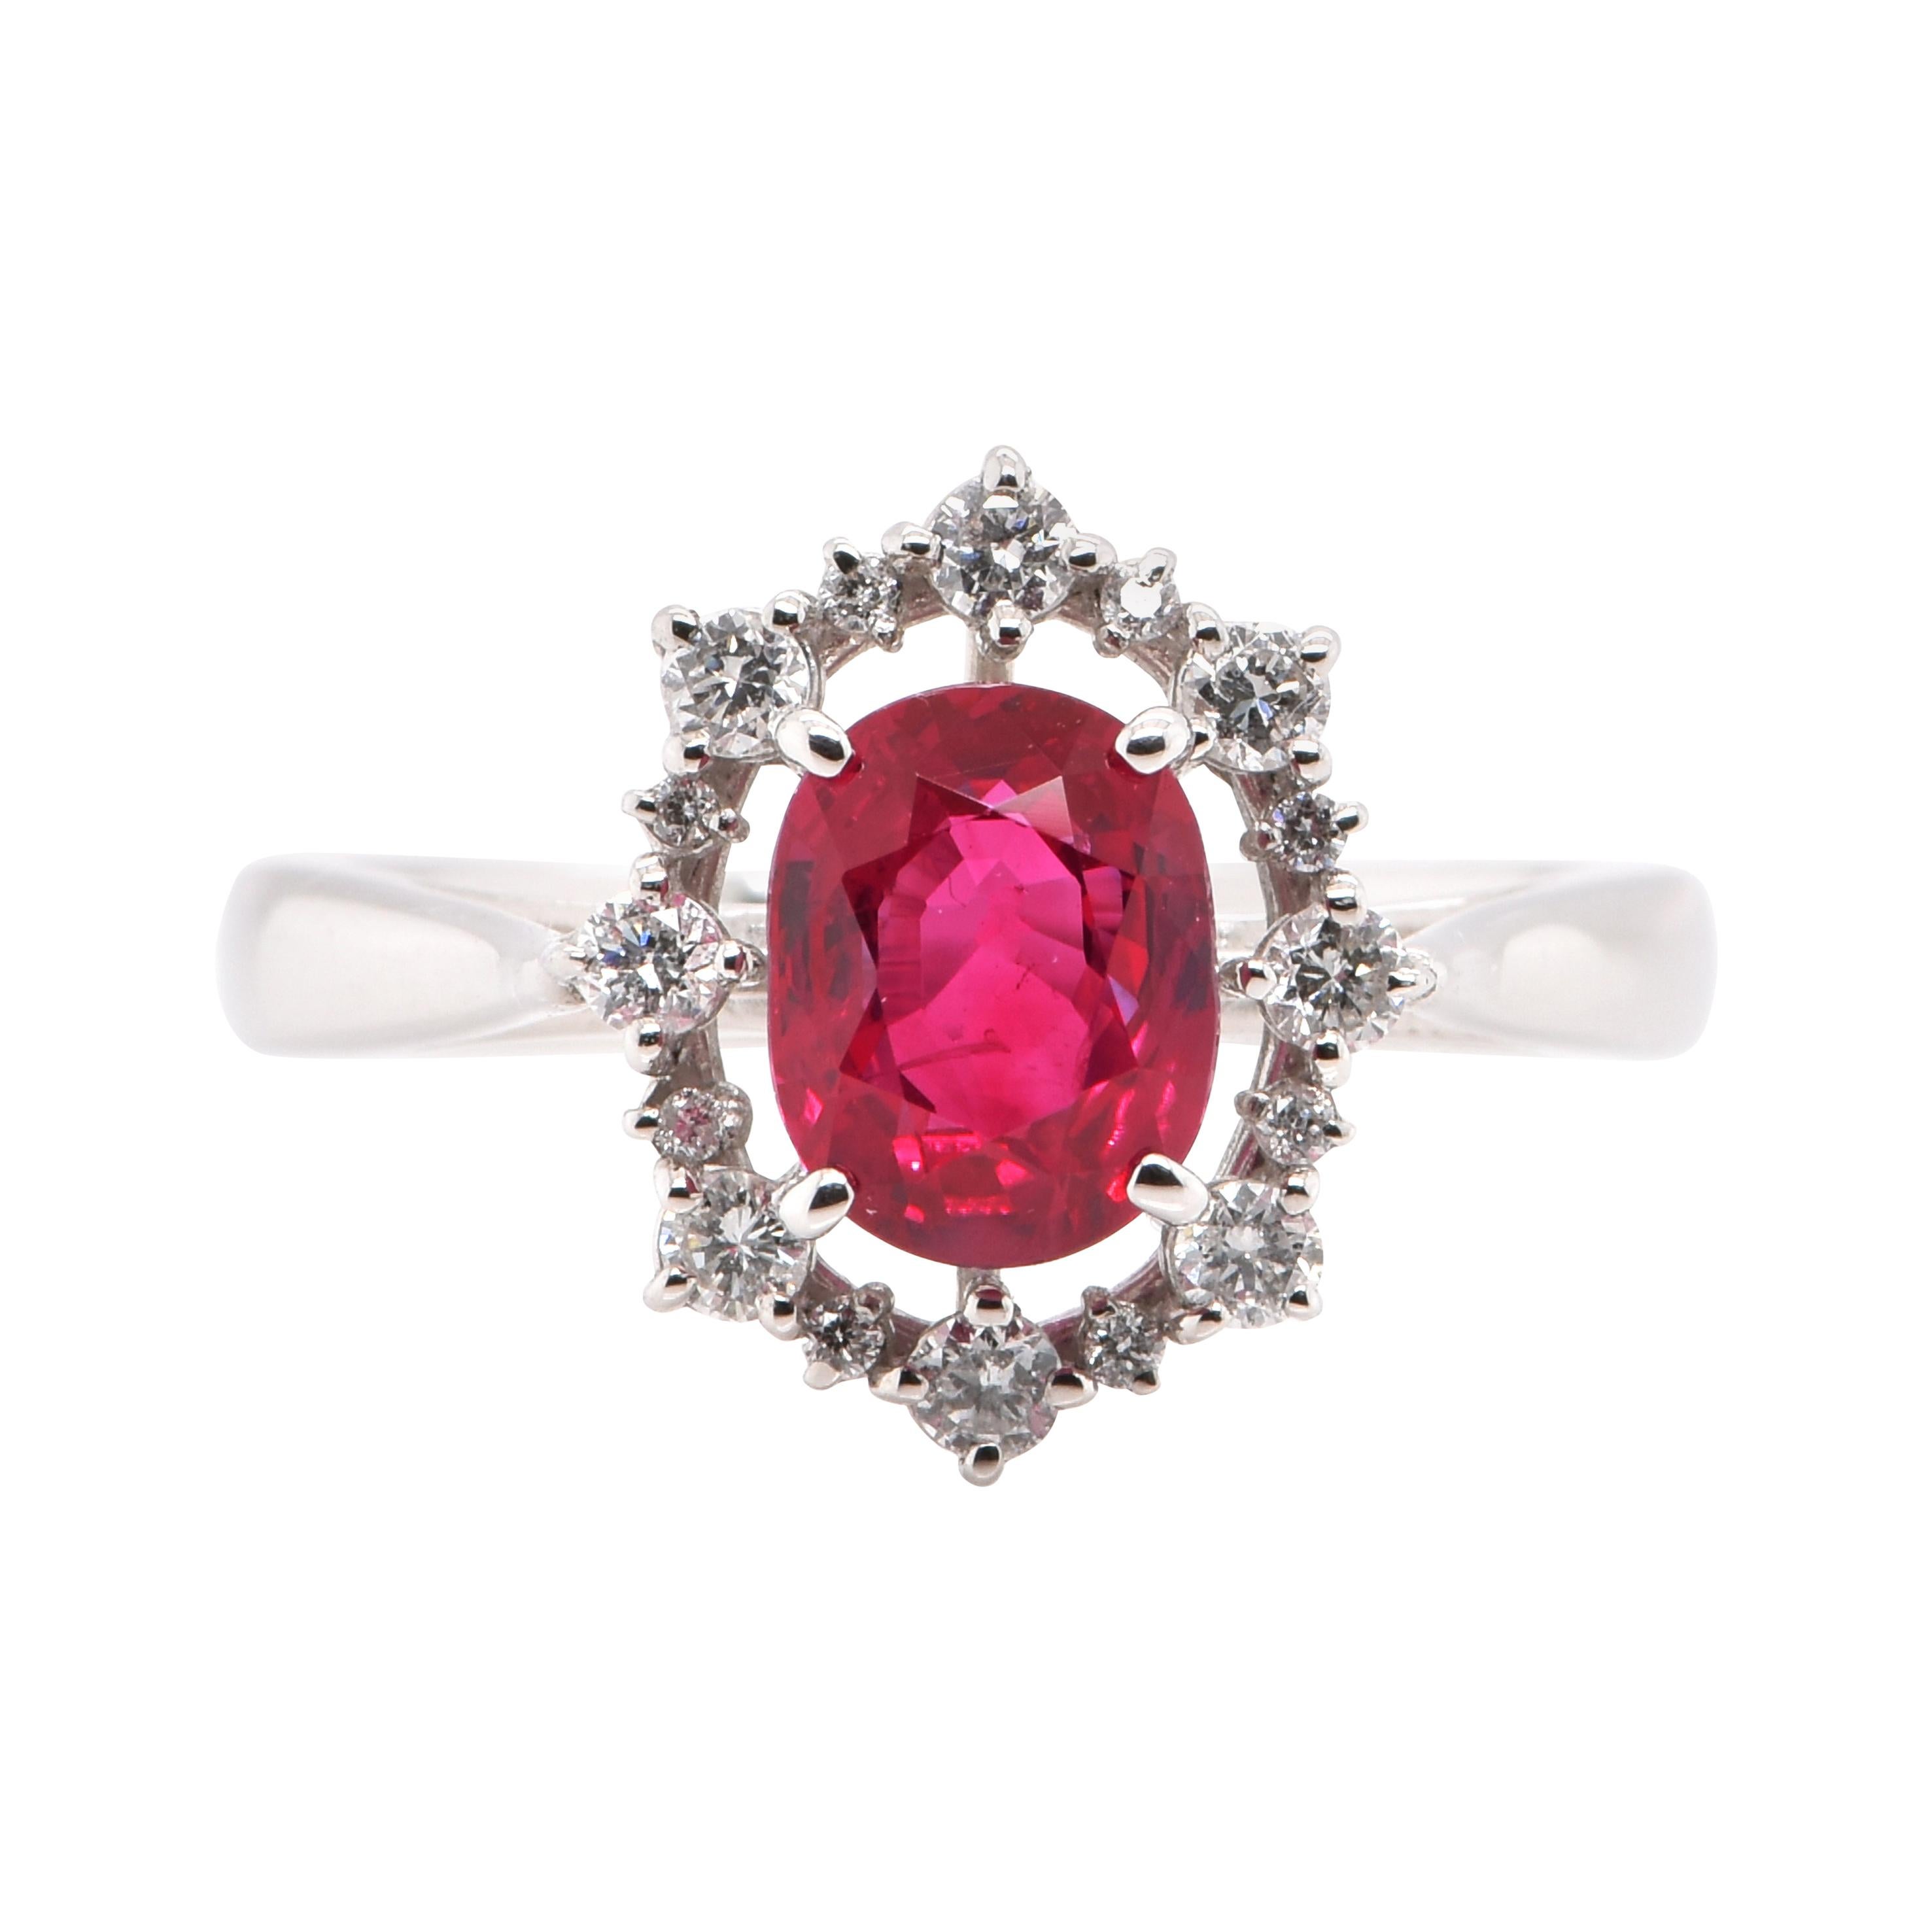 2.01 Carat Natural Burmese Ruby Ring Set in Platinum Certified by GIA For Sale